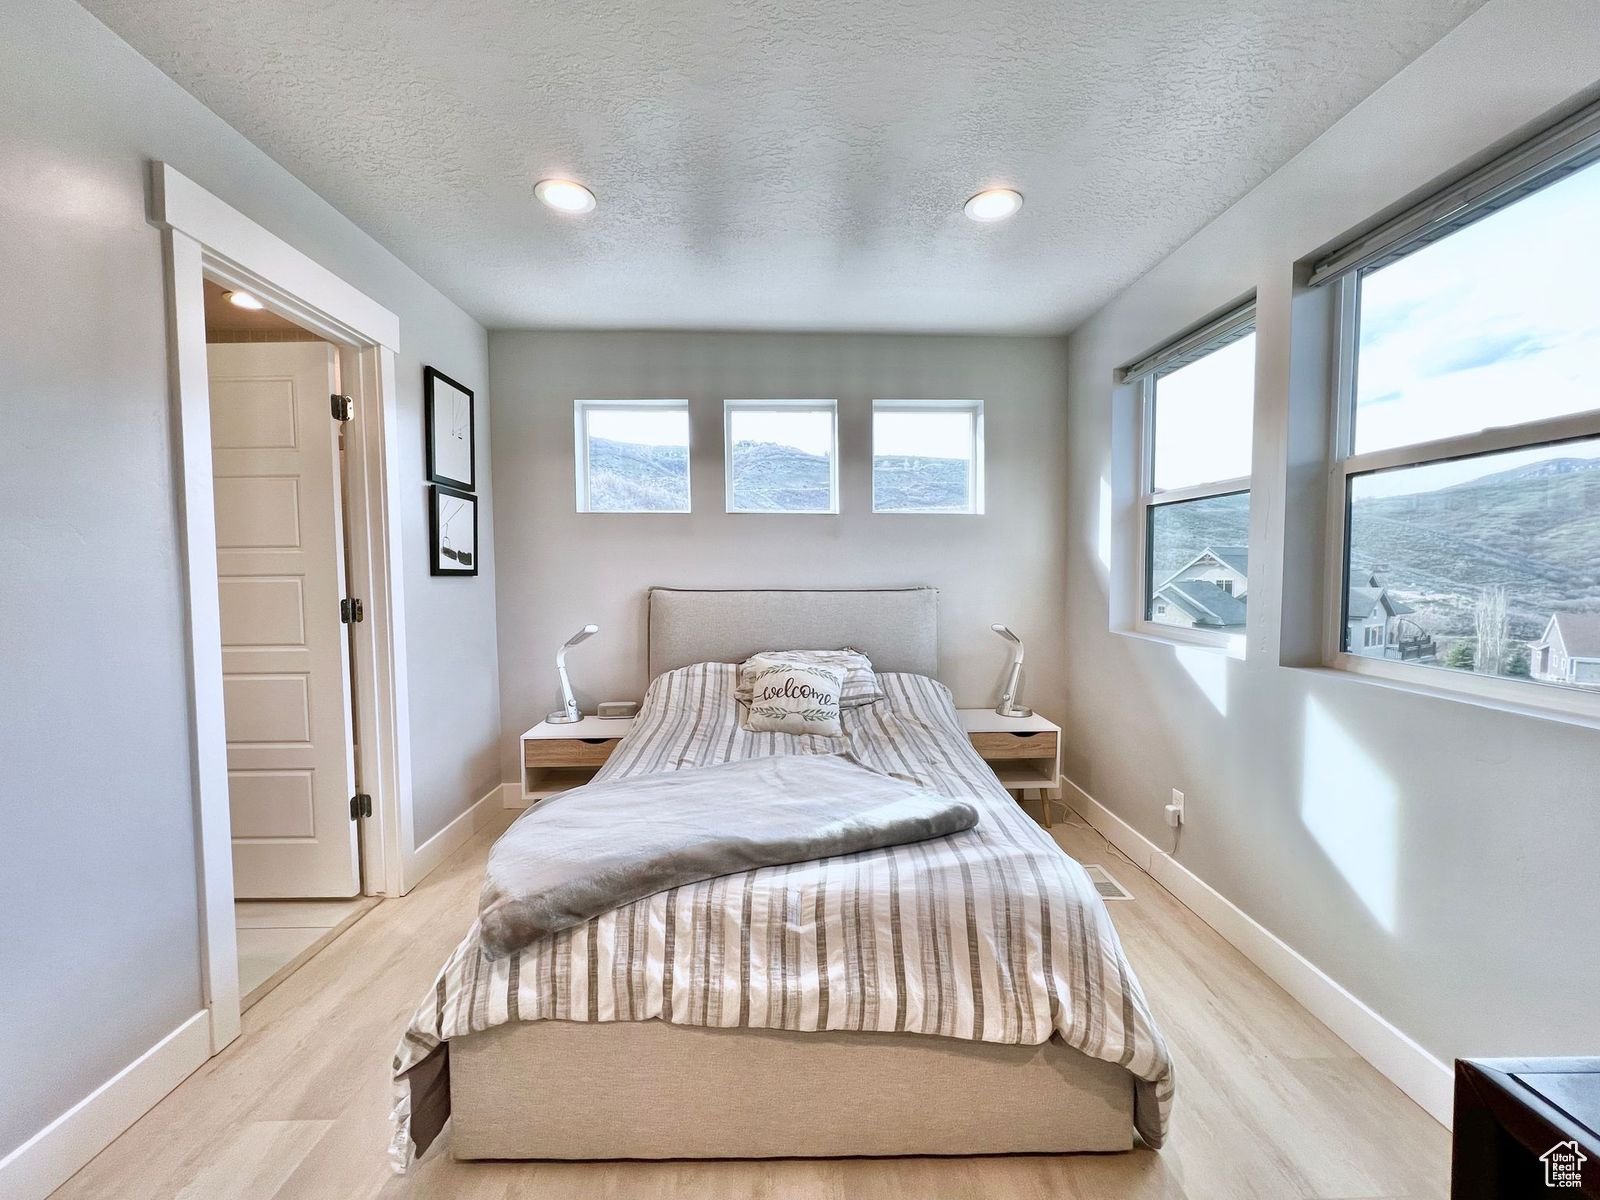 Bedroom with a textured ceiling and light hardwood / wood-style floors